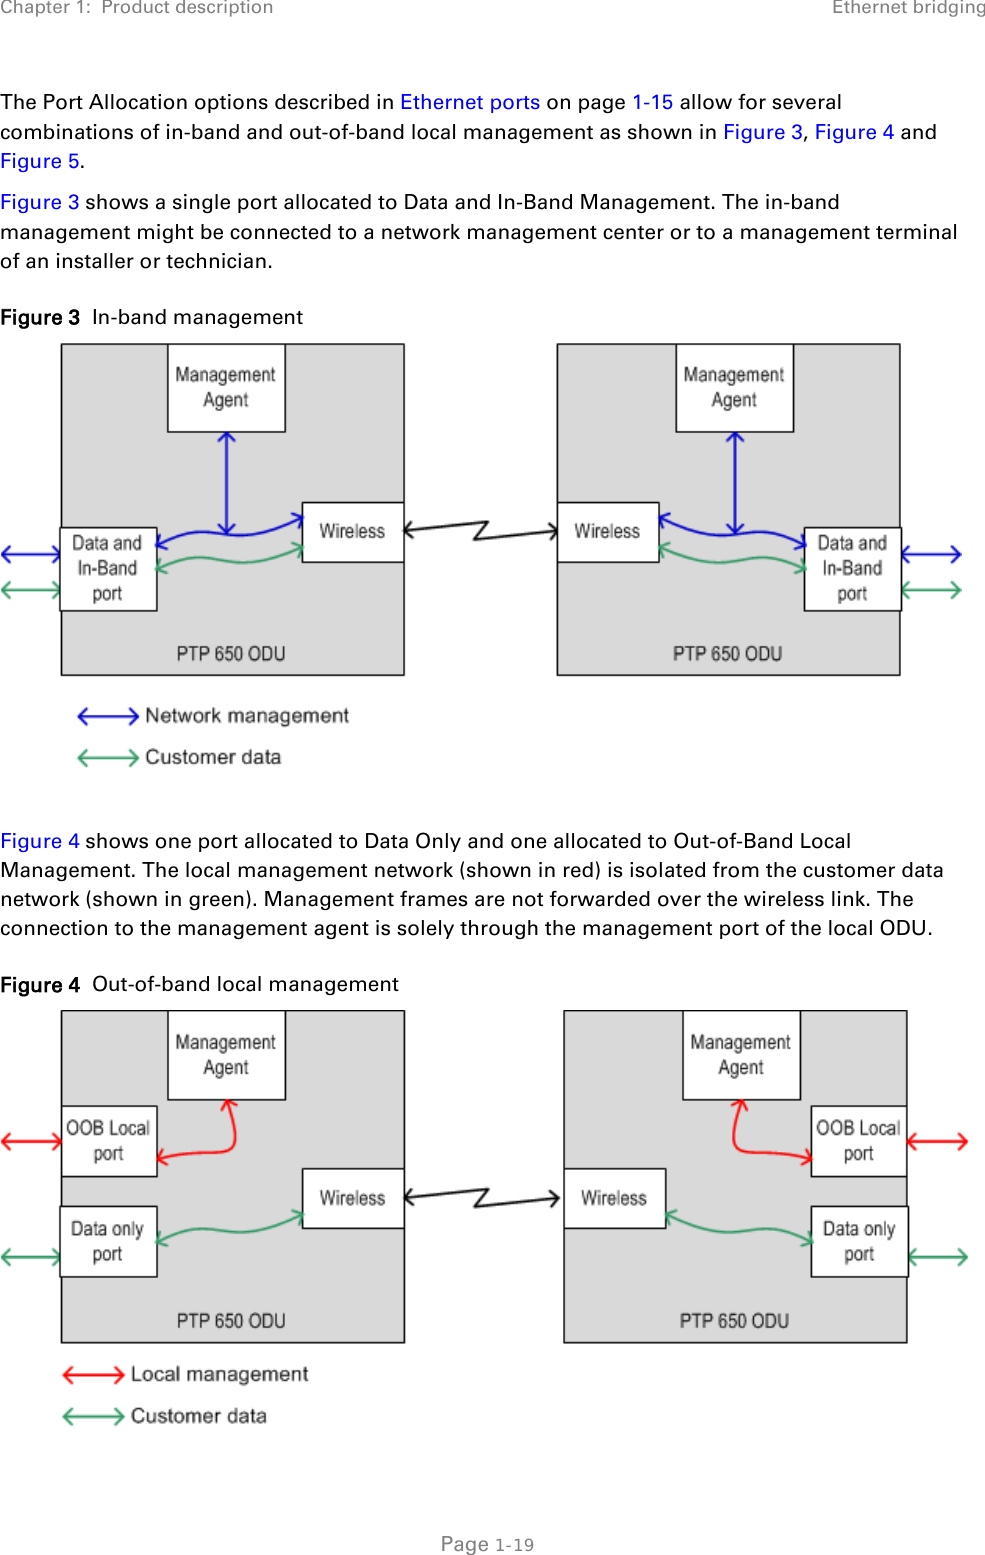 Chapter 1:  Product description Ethernet bridging  The Port Allocation options described in Ethernet ports on page 1-15 allow for several combinations of in-band and out-of-band local management as shown in Figure 3, Figure 4 and Figure 5. Figure 3 shows a single port allocated to Data and In-Band Management. The in-band management might be connected to a network management center or to a management terminal of an installer or technician.  Figure 3  In-band management   Figure 4 shows one port allocated to Data Only and one allocated to Out-of-Band Local Management. The local management network (shown in red) is isolated from the customer data network (shown in green). Management frames are not forwarded over the wireless link. The connection to the management agent is solely through the management port of the local ODU. Figure 4  Out-of-band local management   Page 1-19 